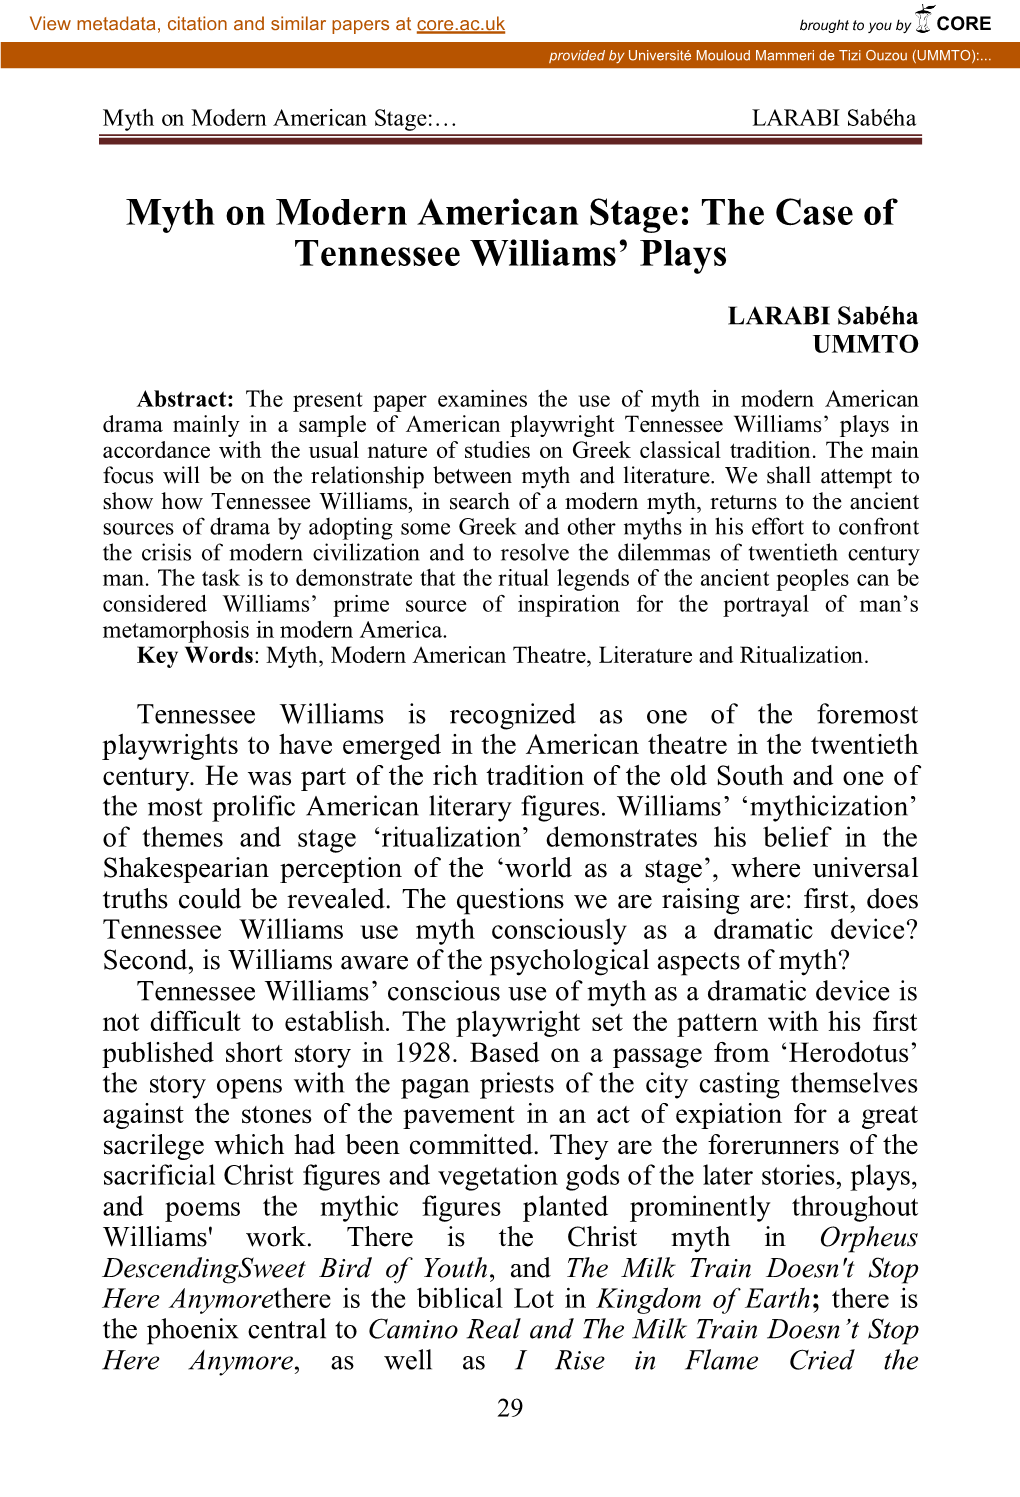 Myth on Modern American Stage: the Case of Tennessee Williams' Plays